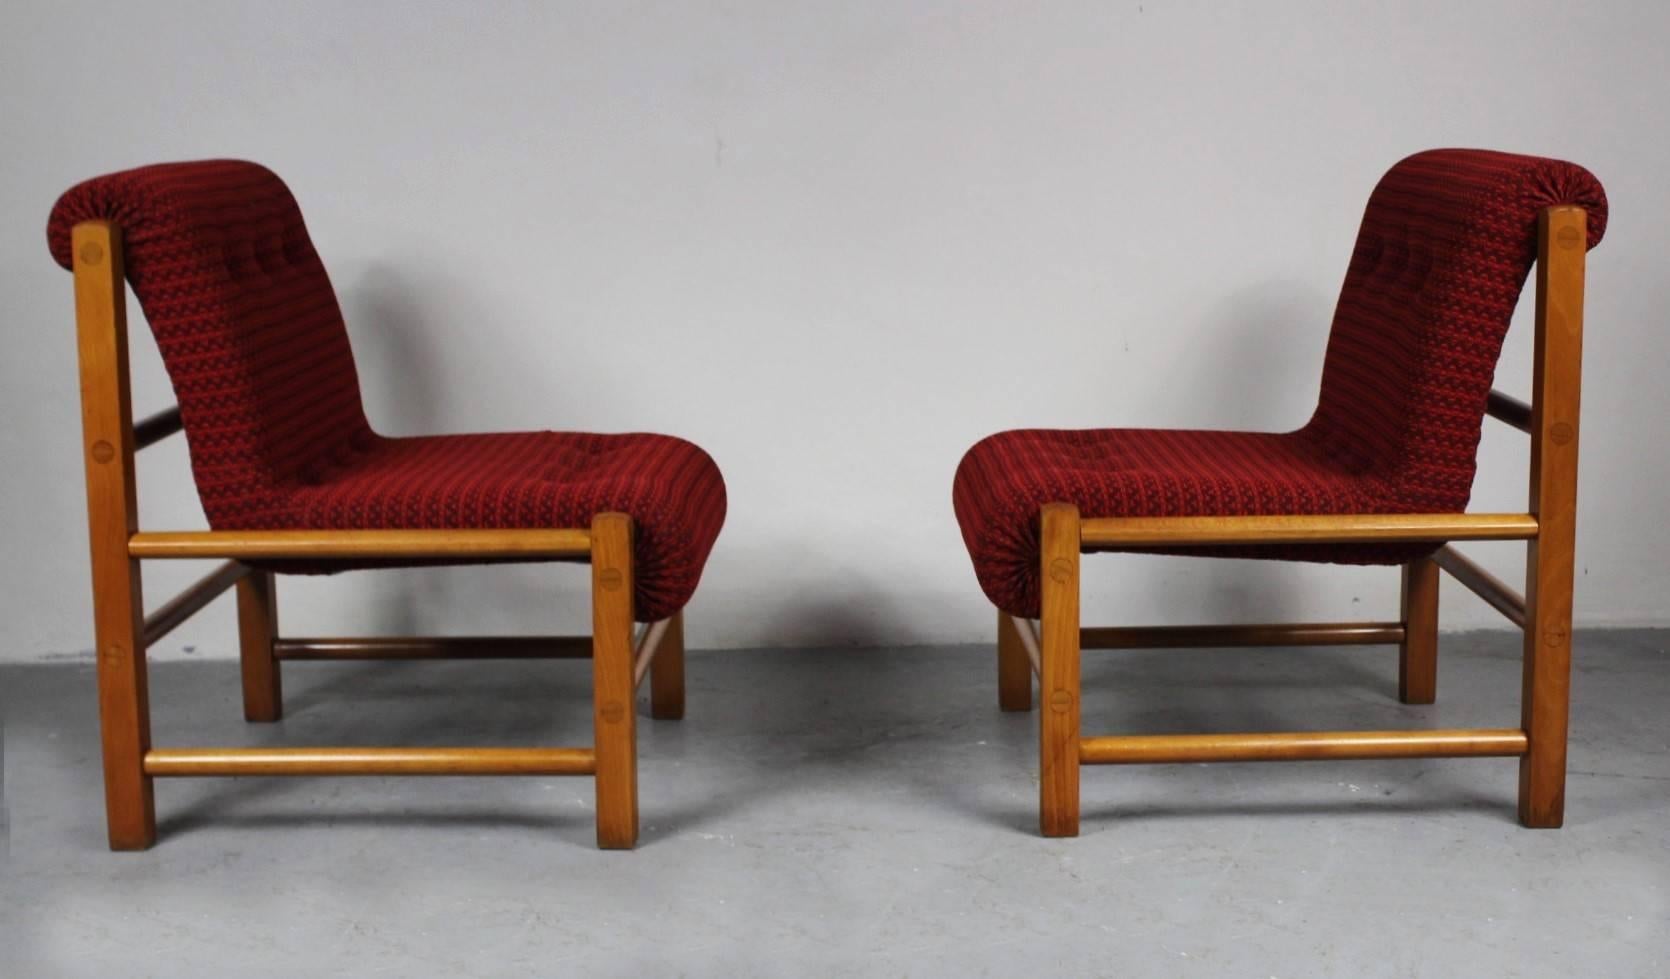 Pair of easy chairs made in the Czech republic in the 1960s. Upholstered with thick red fabric. The chairs are in very good original condition.